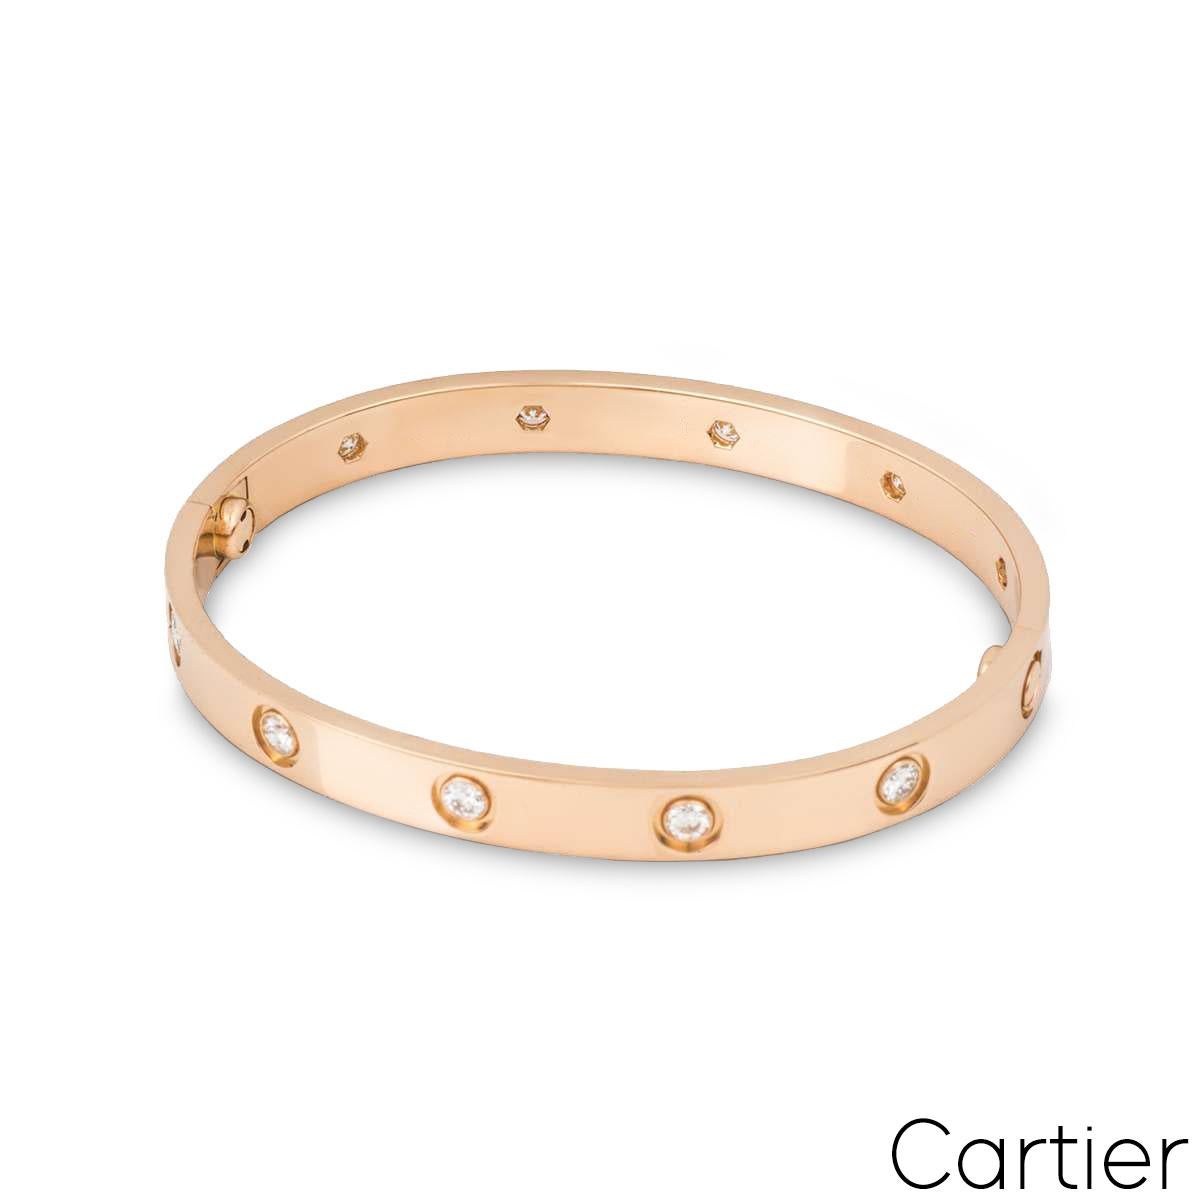 An 18k rose gold full diamond Love bracelet by Cartier. The bracelet is set with 10 round brilliant cut diamonds circulating the outer edge throughout totalling 0.96ct. The bracelet is a size 17 and features the new style screw fitting and has a